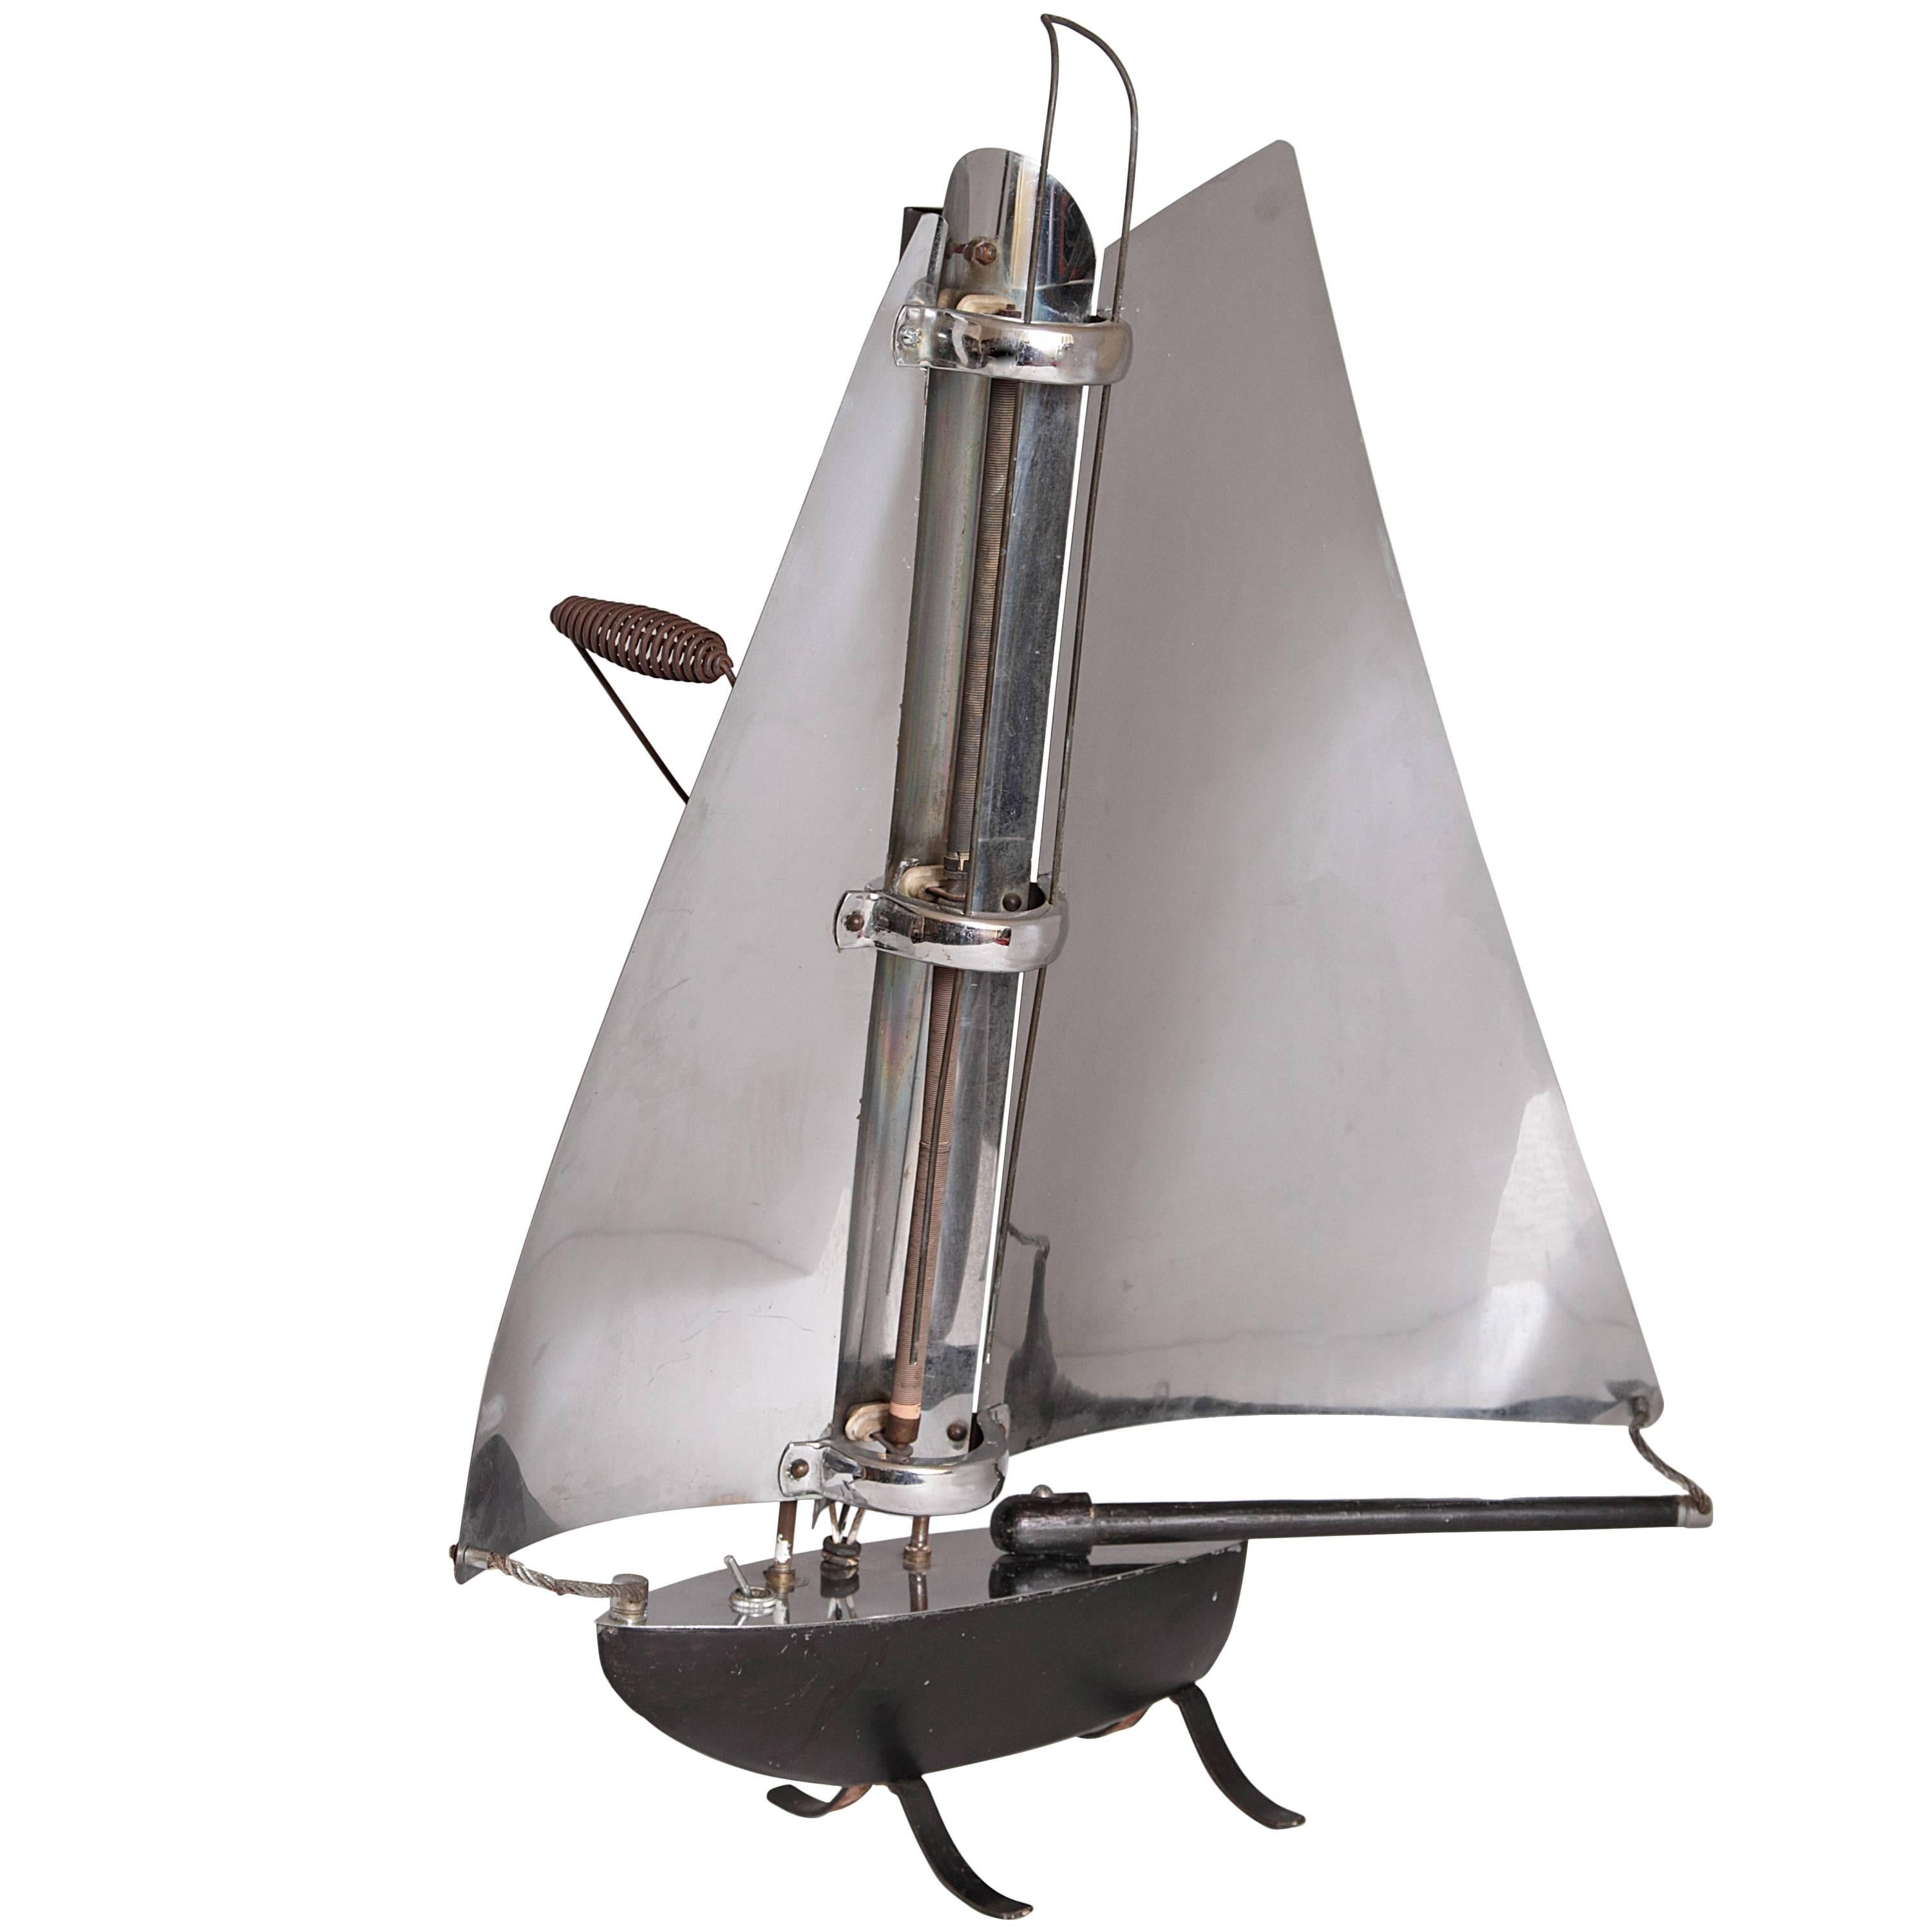 British Machine Age Sailboat Radiant Heater by Bunting Electric, circa 1930s For Sale